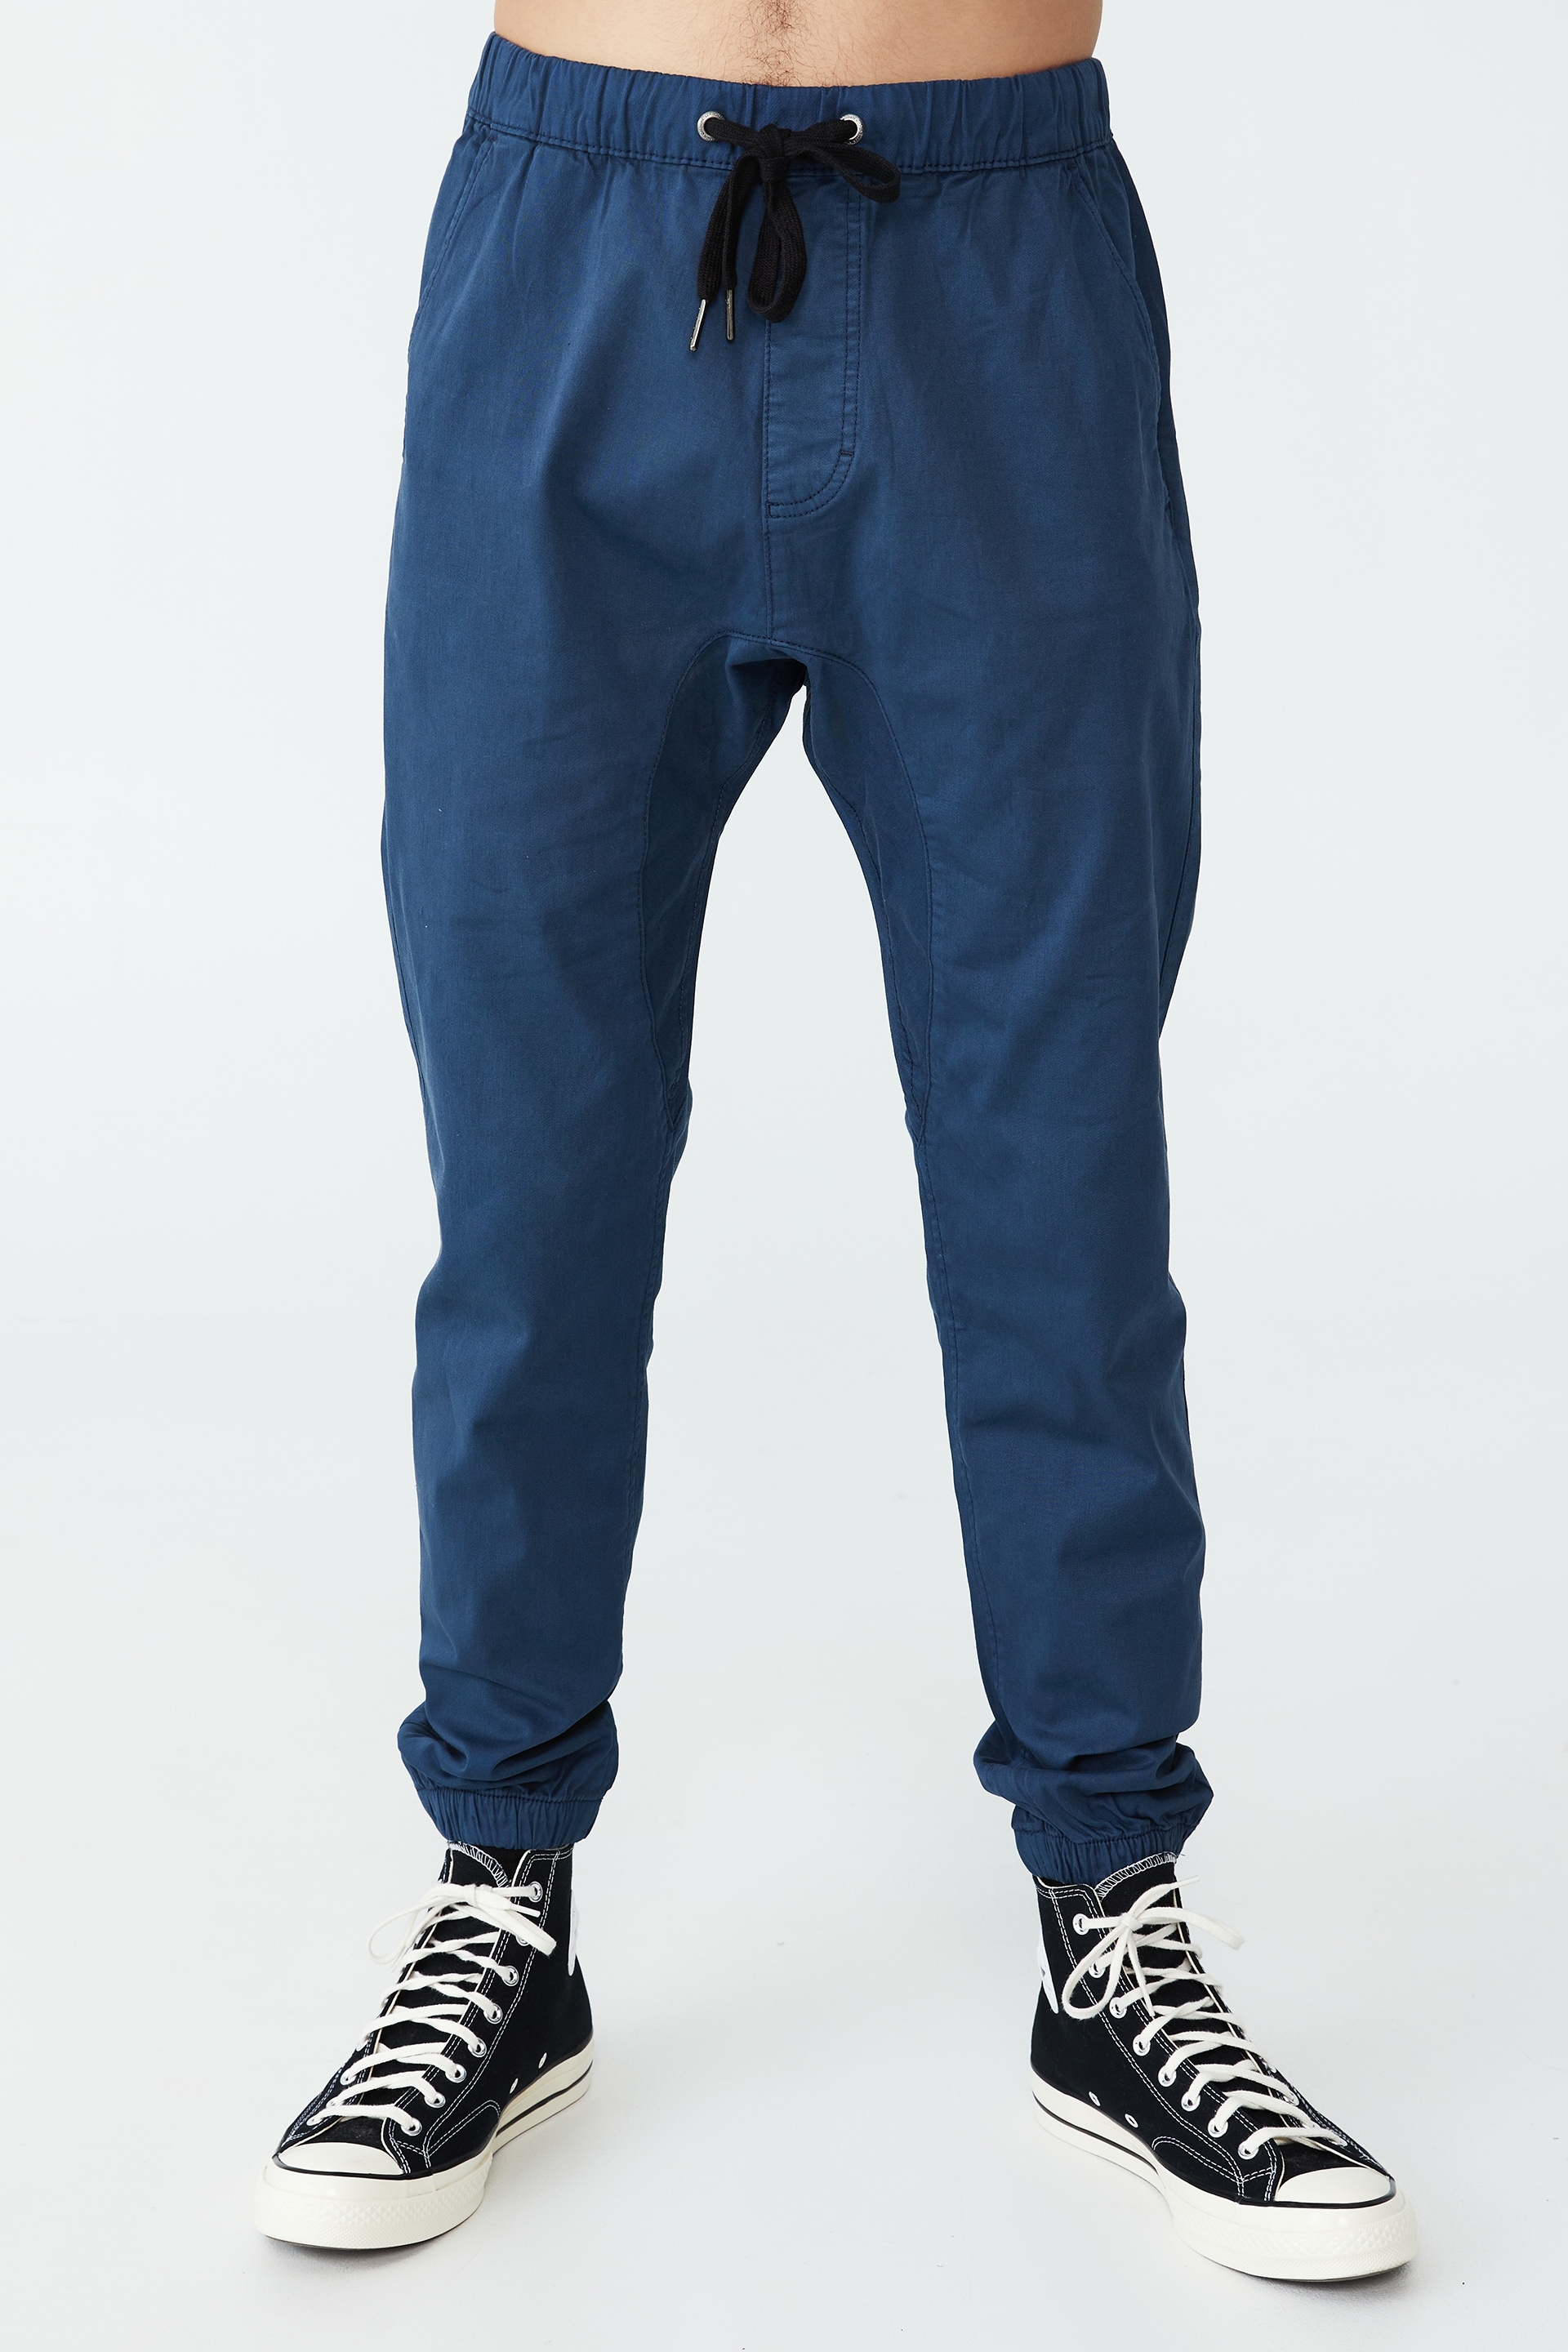 Buy Cotton On Drake Cuffed Pants in Washed Stone 2024 Online